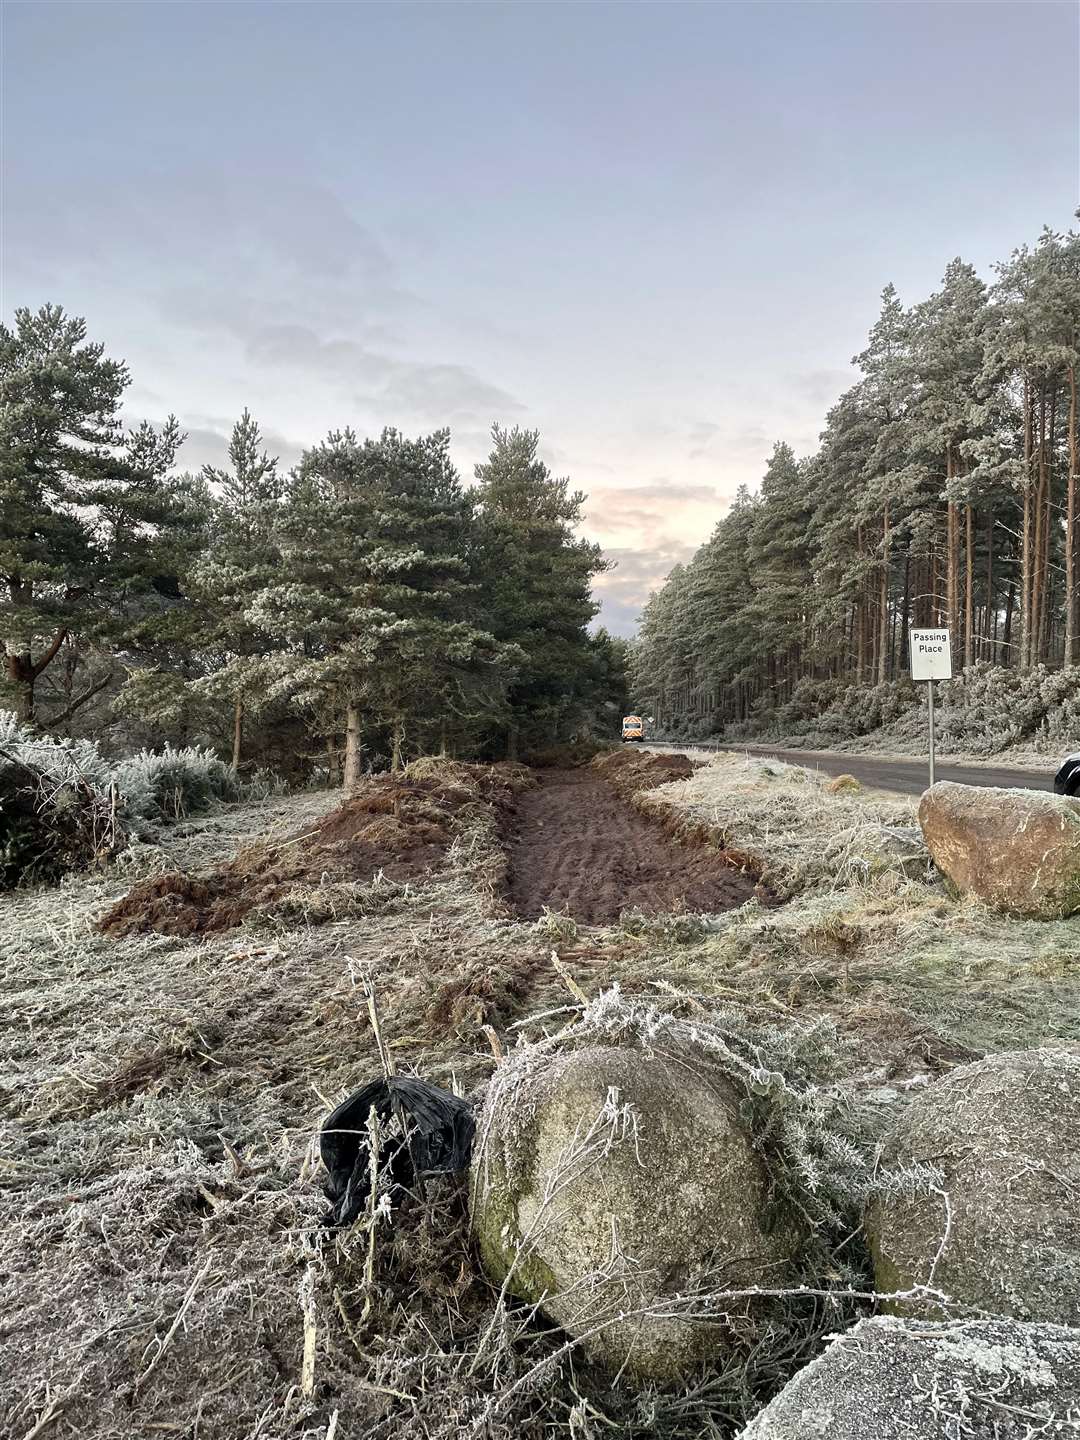 Construction work has begun on around 885 metres (0.5 miles) of track at Balblair Wood, part of Loch Fleet National Nature Reserve.